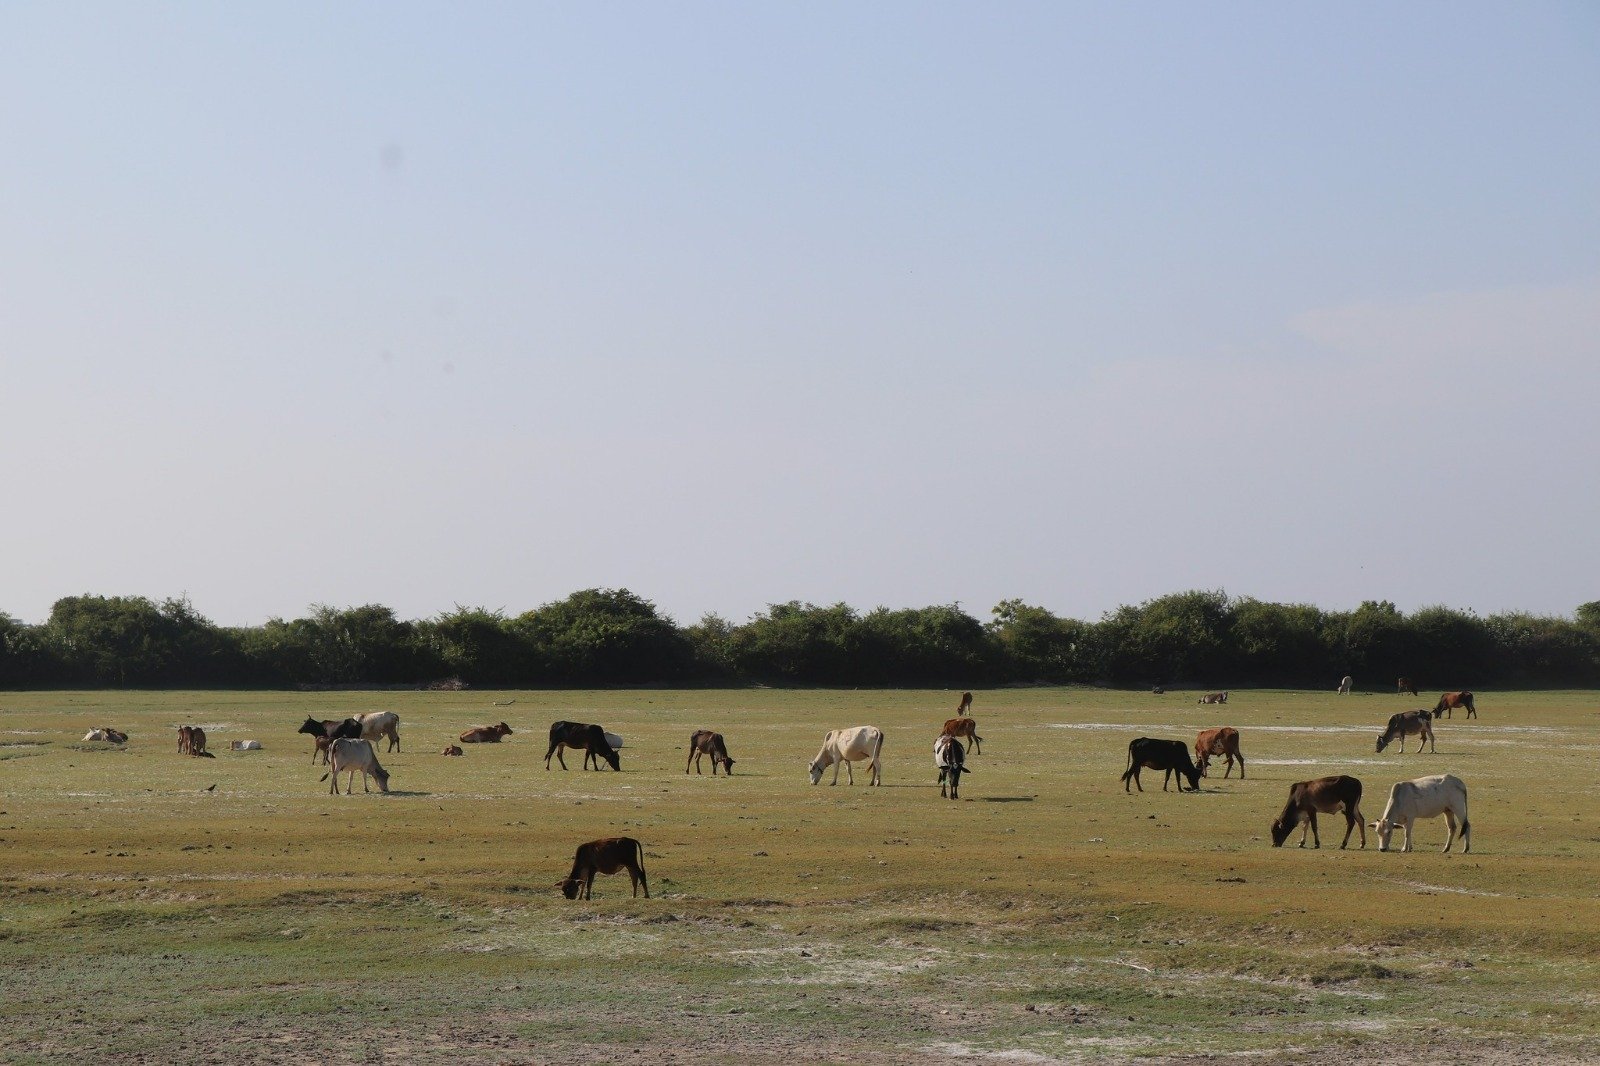 An open ground showing cattle grazing.